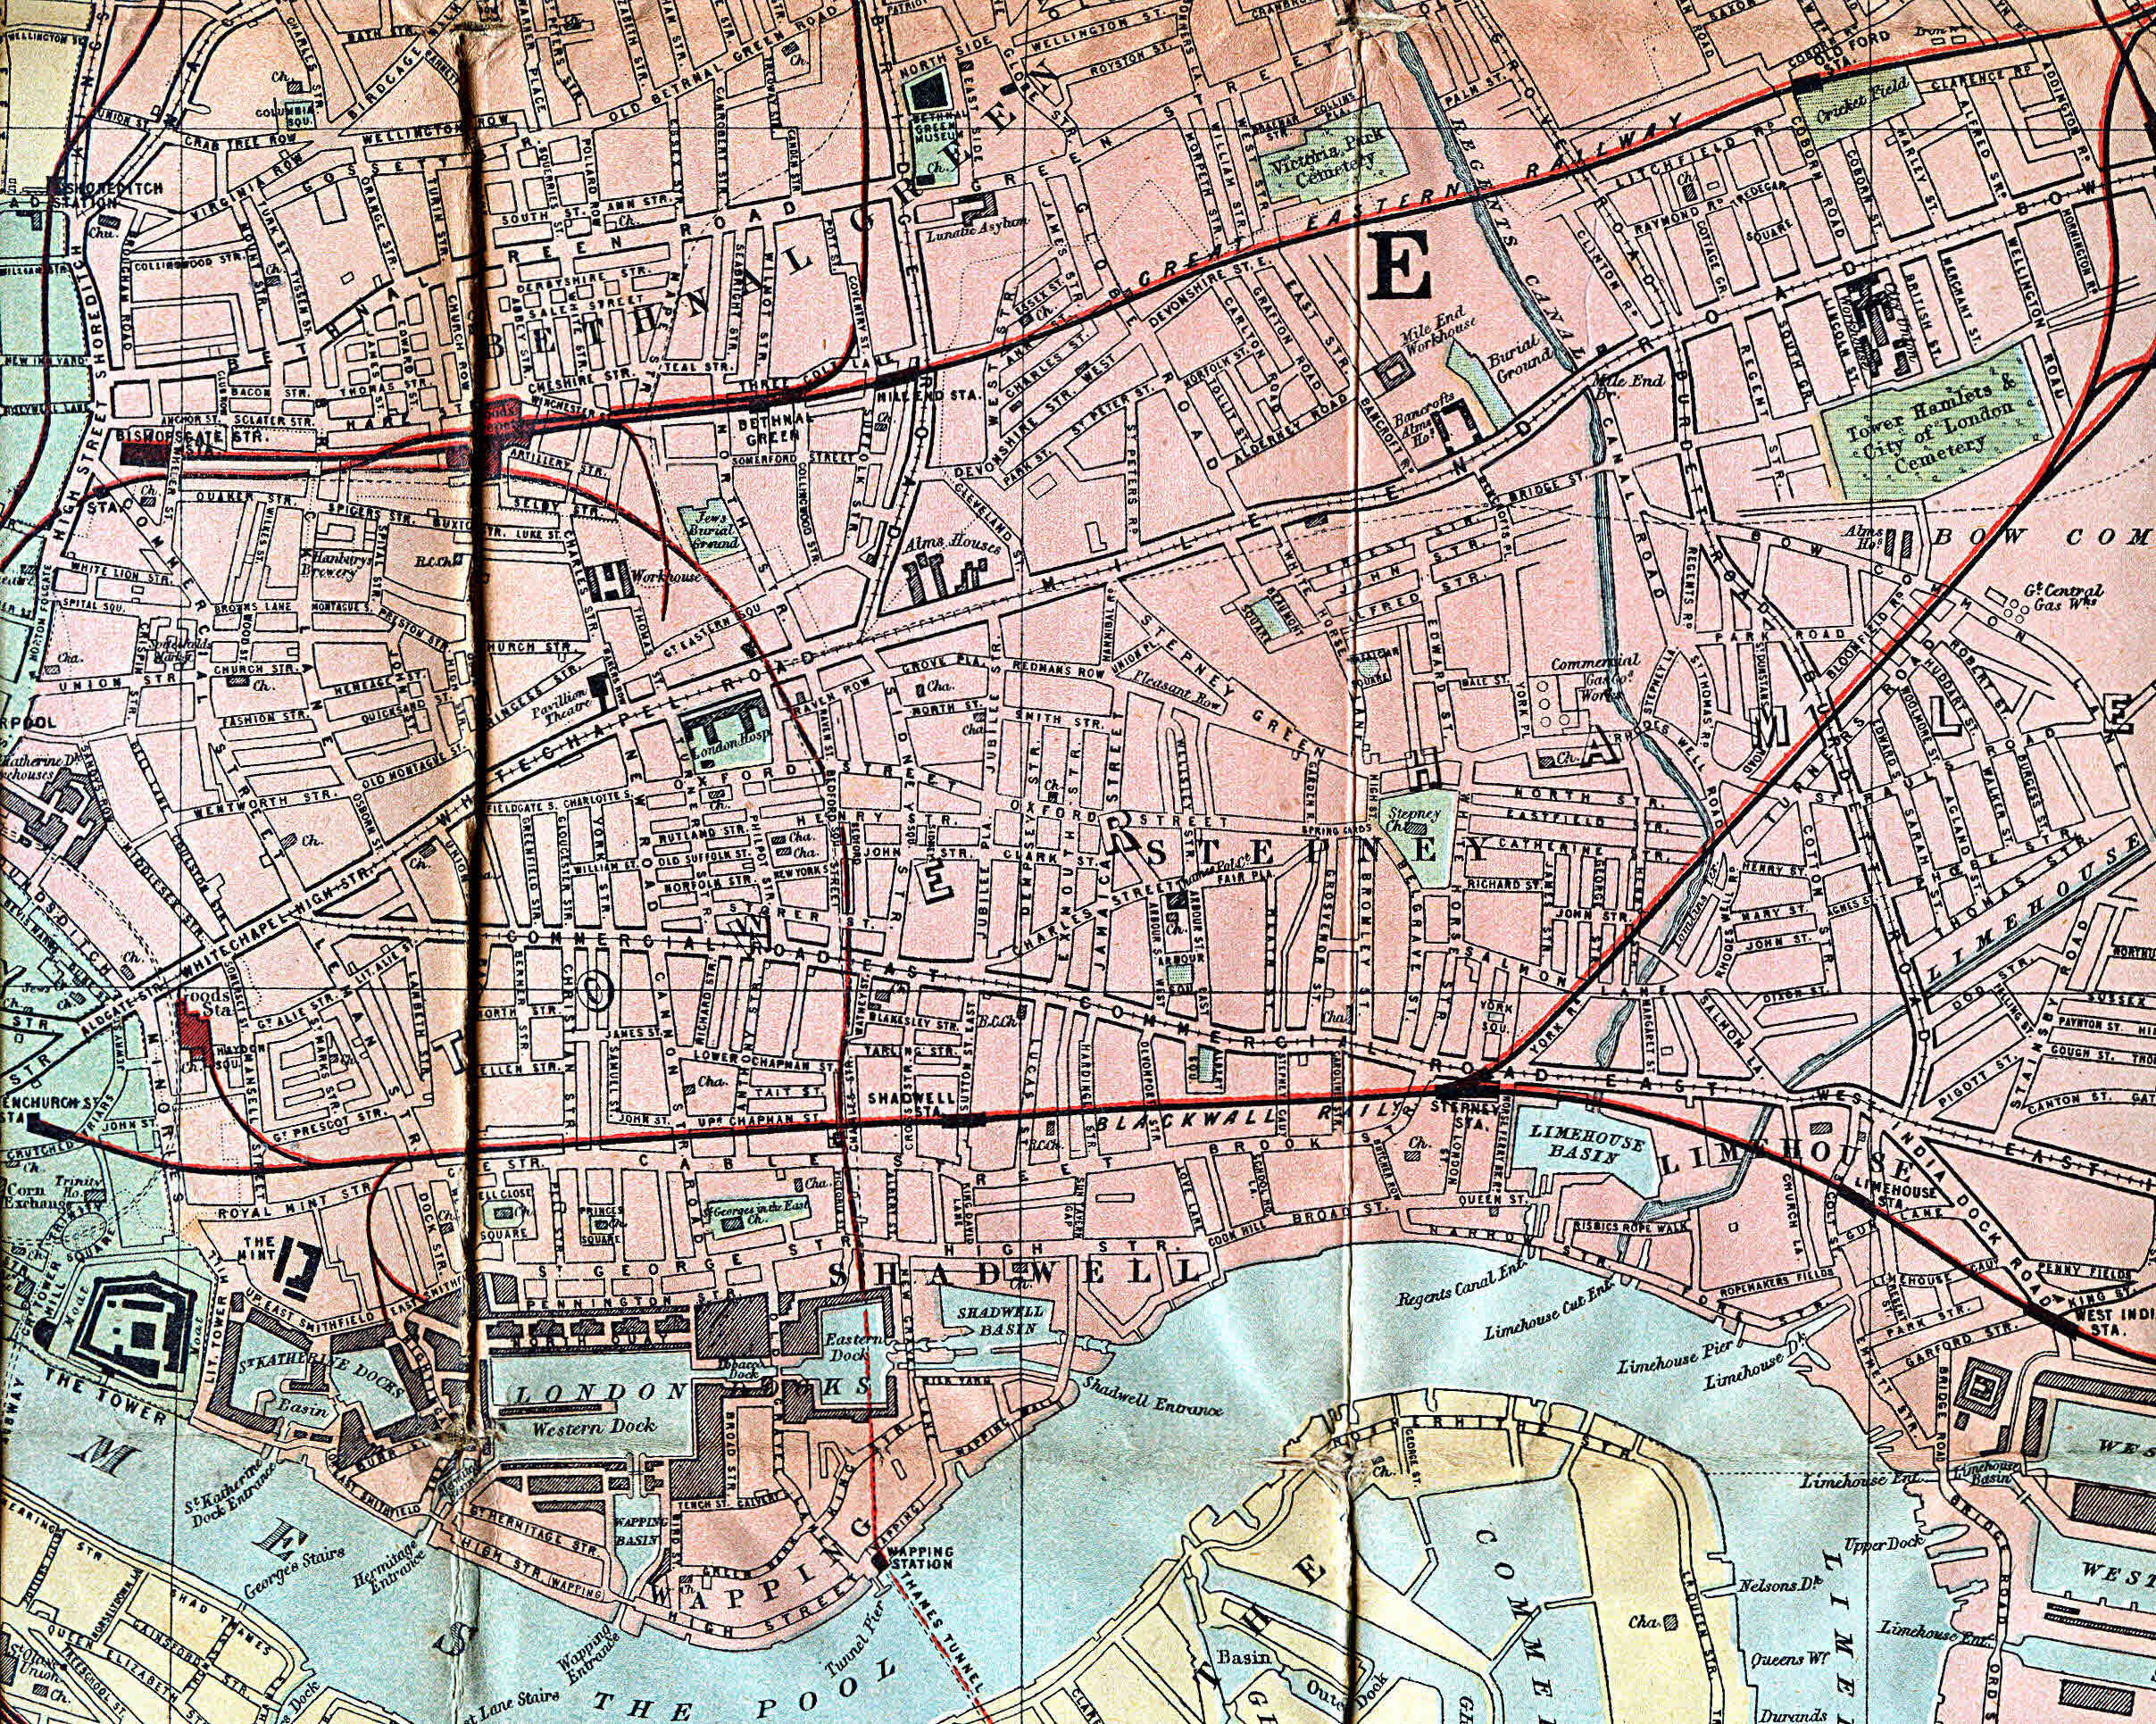 1875 - W.H. Smith and Sons, "Plan of London"